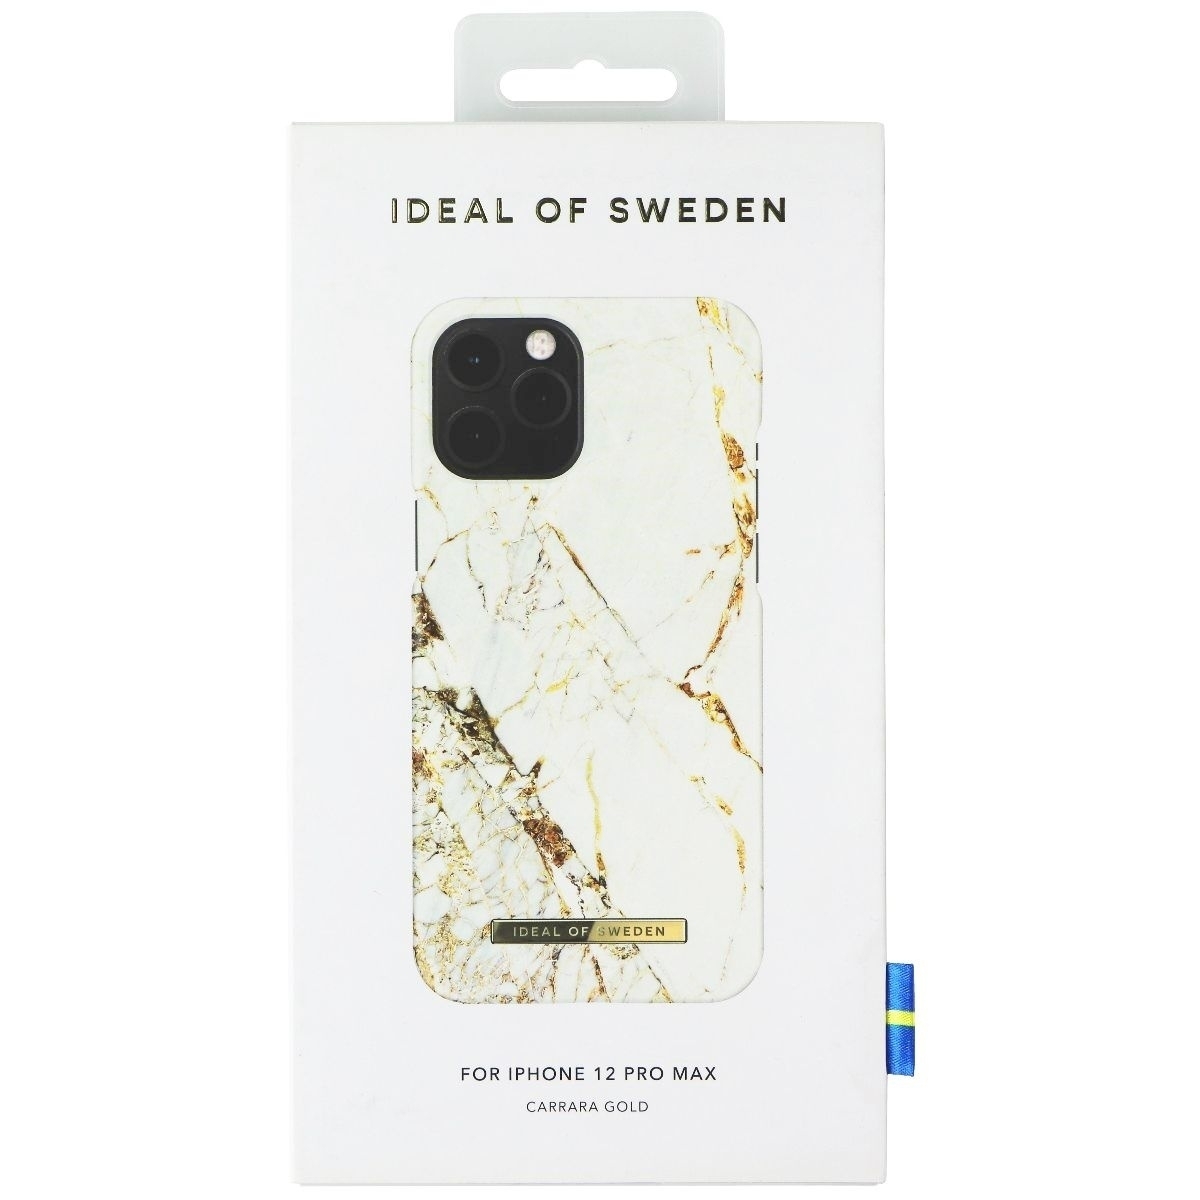 IDeal Of Sweden Printed Case For IPhone 12 Pro Max - Carrara Gold